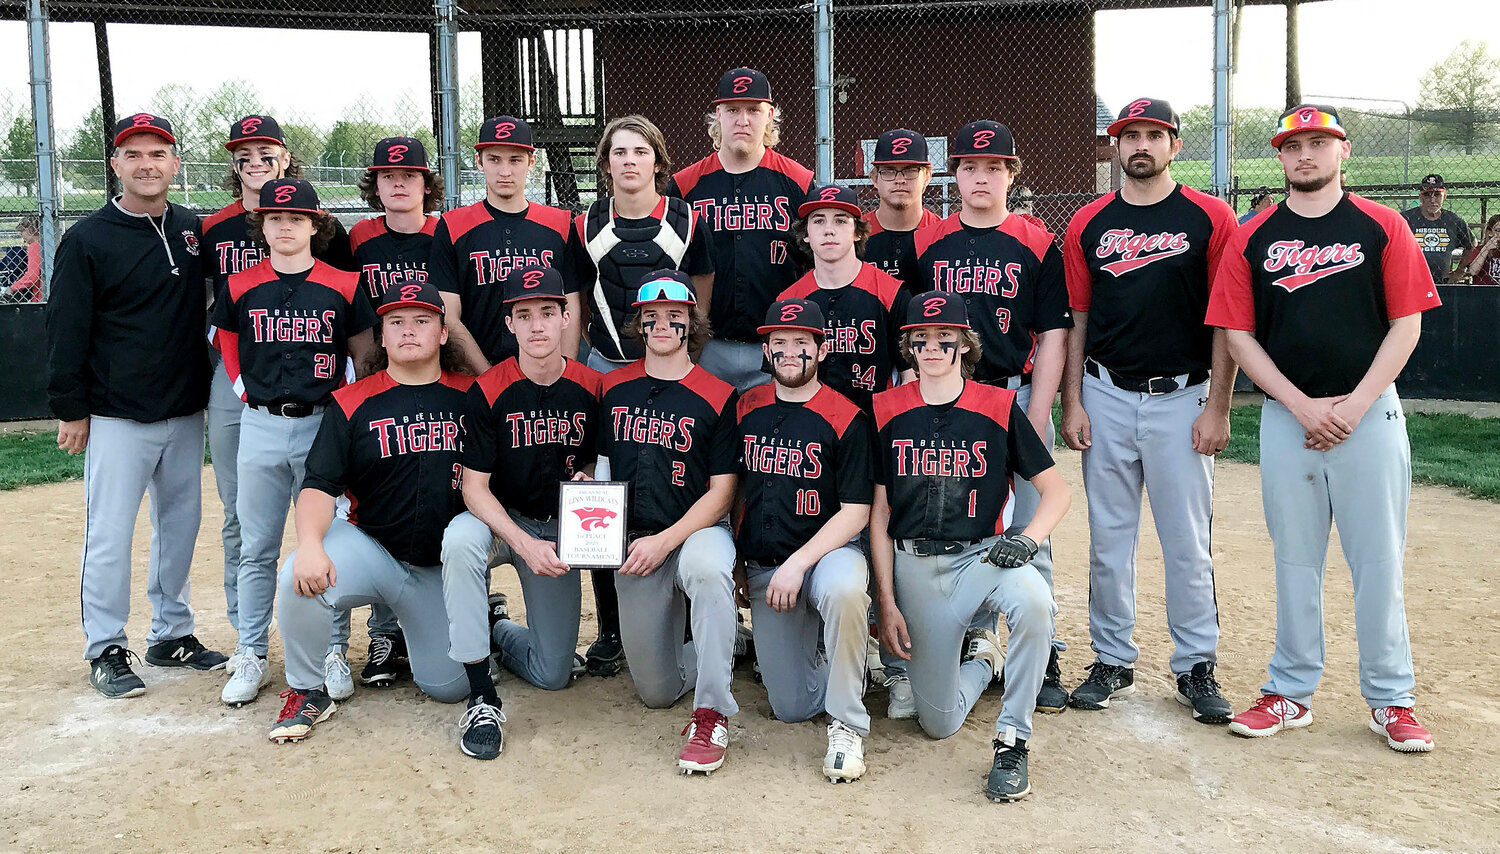 Belle Tiger baseball team members celebrate their 15-6 come-from-behind victory over Hermann’s Bearcats in the championship game of the Linn Baseball Tournament last Wednesday afternoon with a team photo at home plate in Osage County.